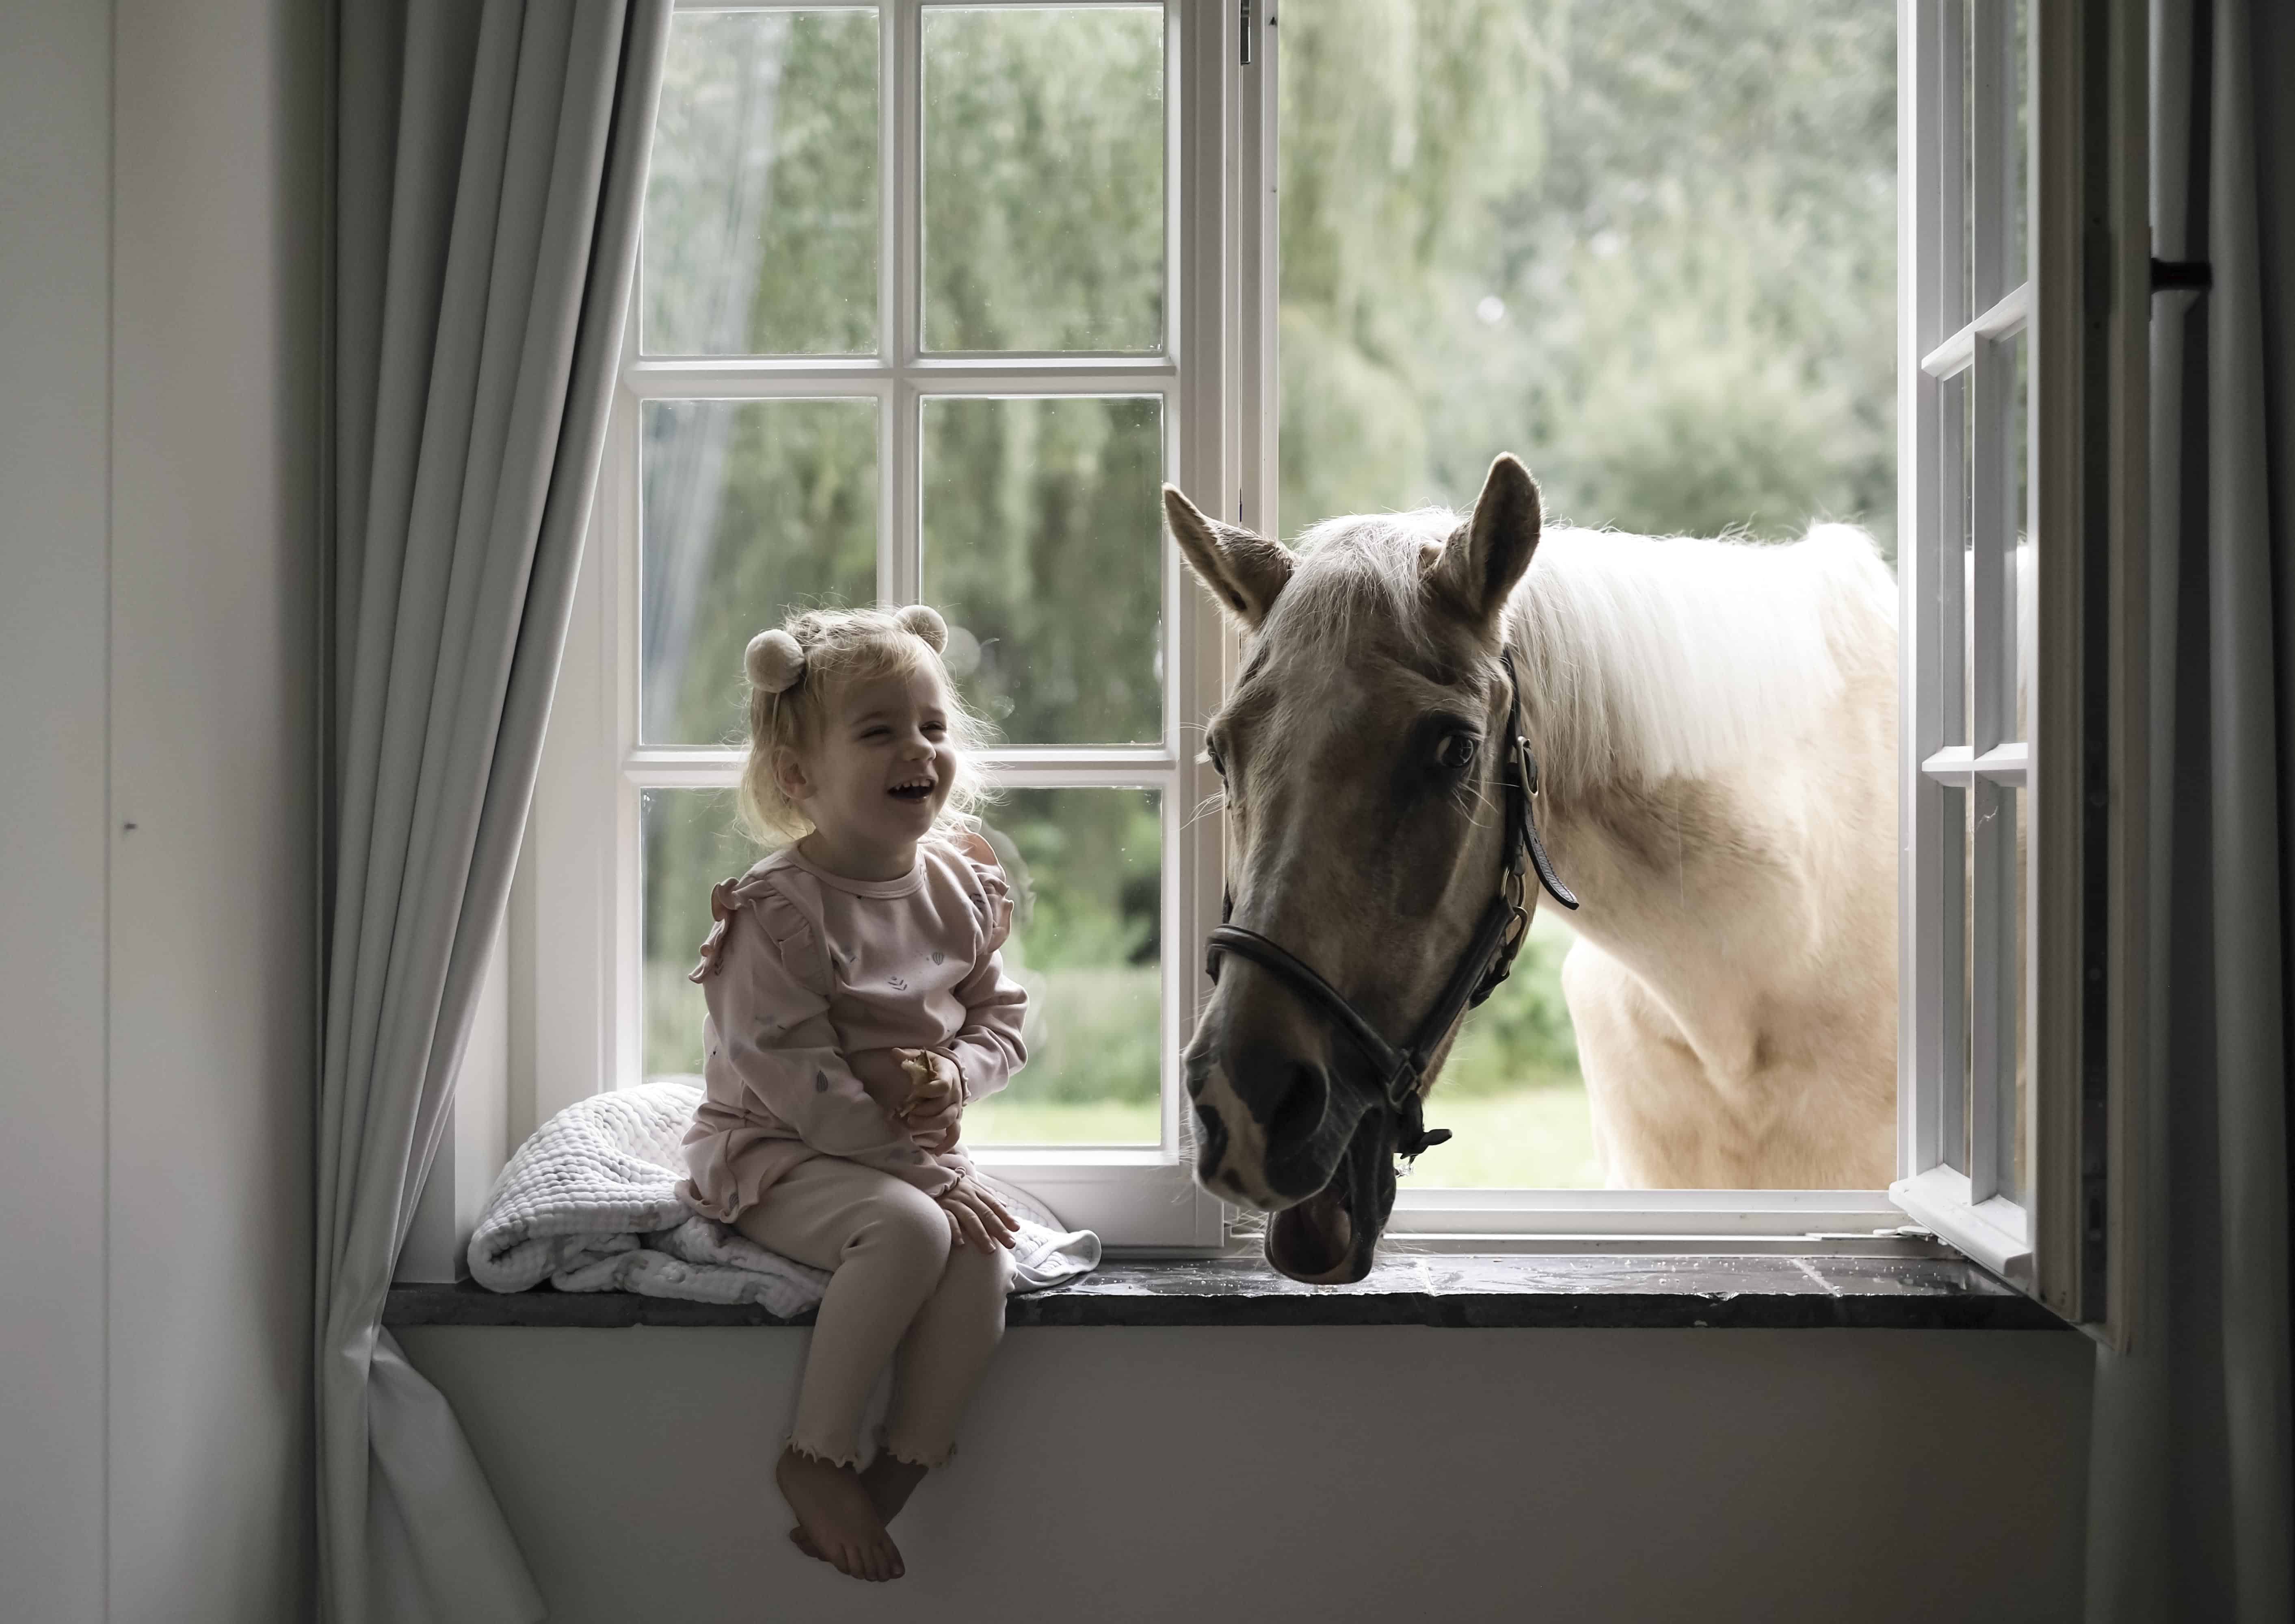 Q&A with Julie V. from @AboutLittlesAndPonies – Children and Pony Photography